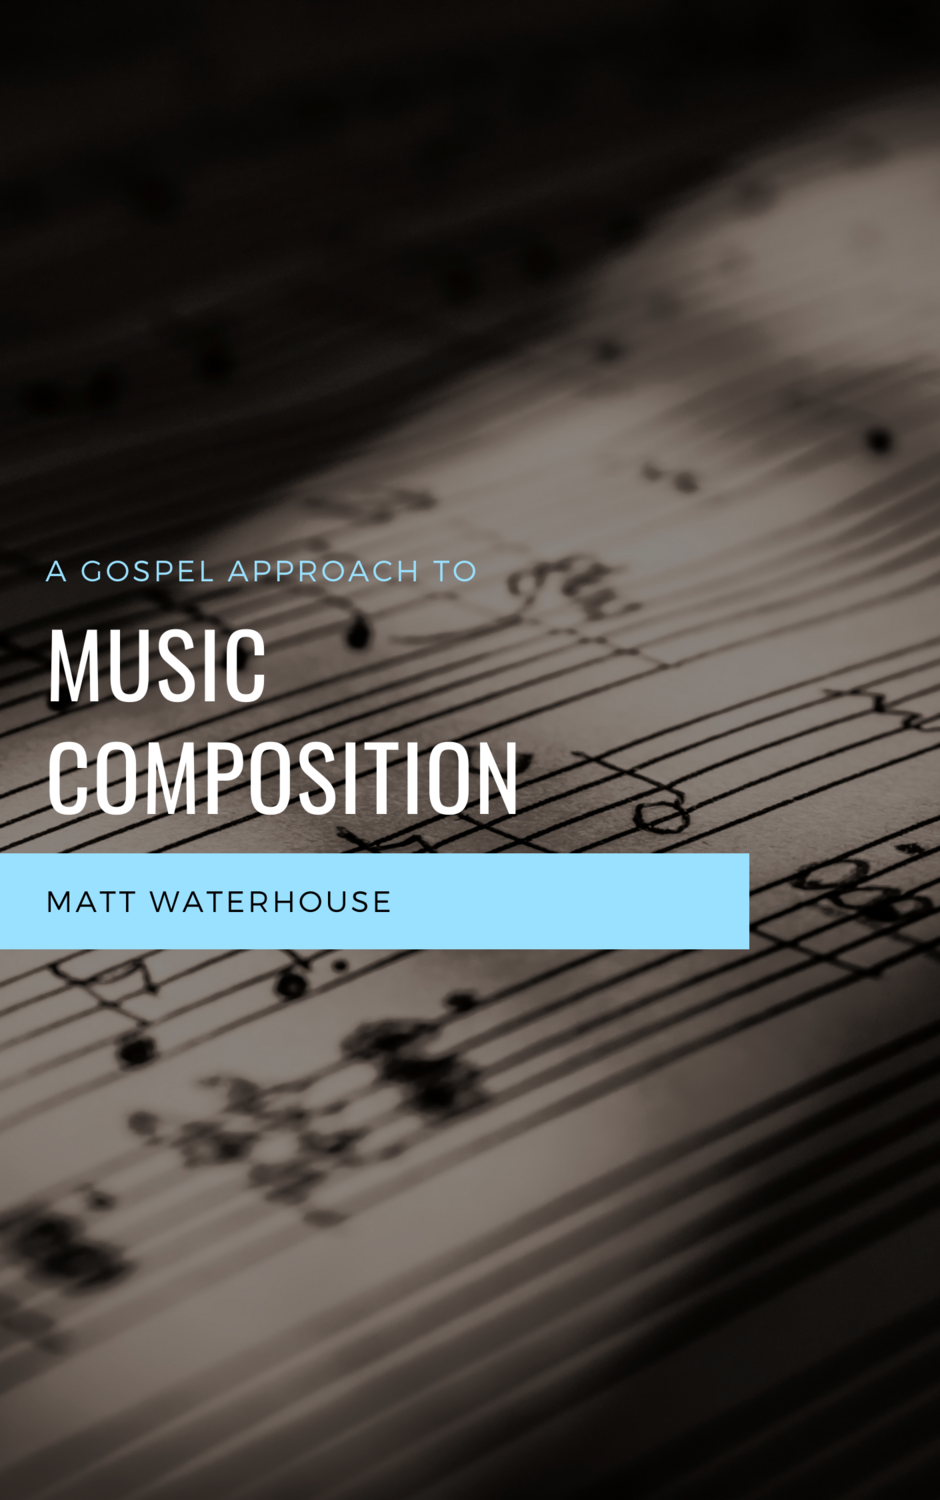 A Gospel Approach to Music Composition